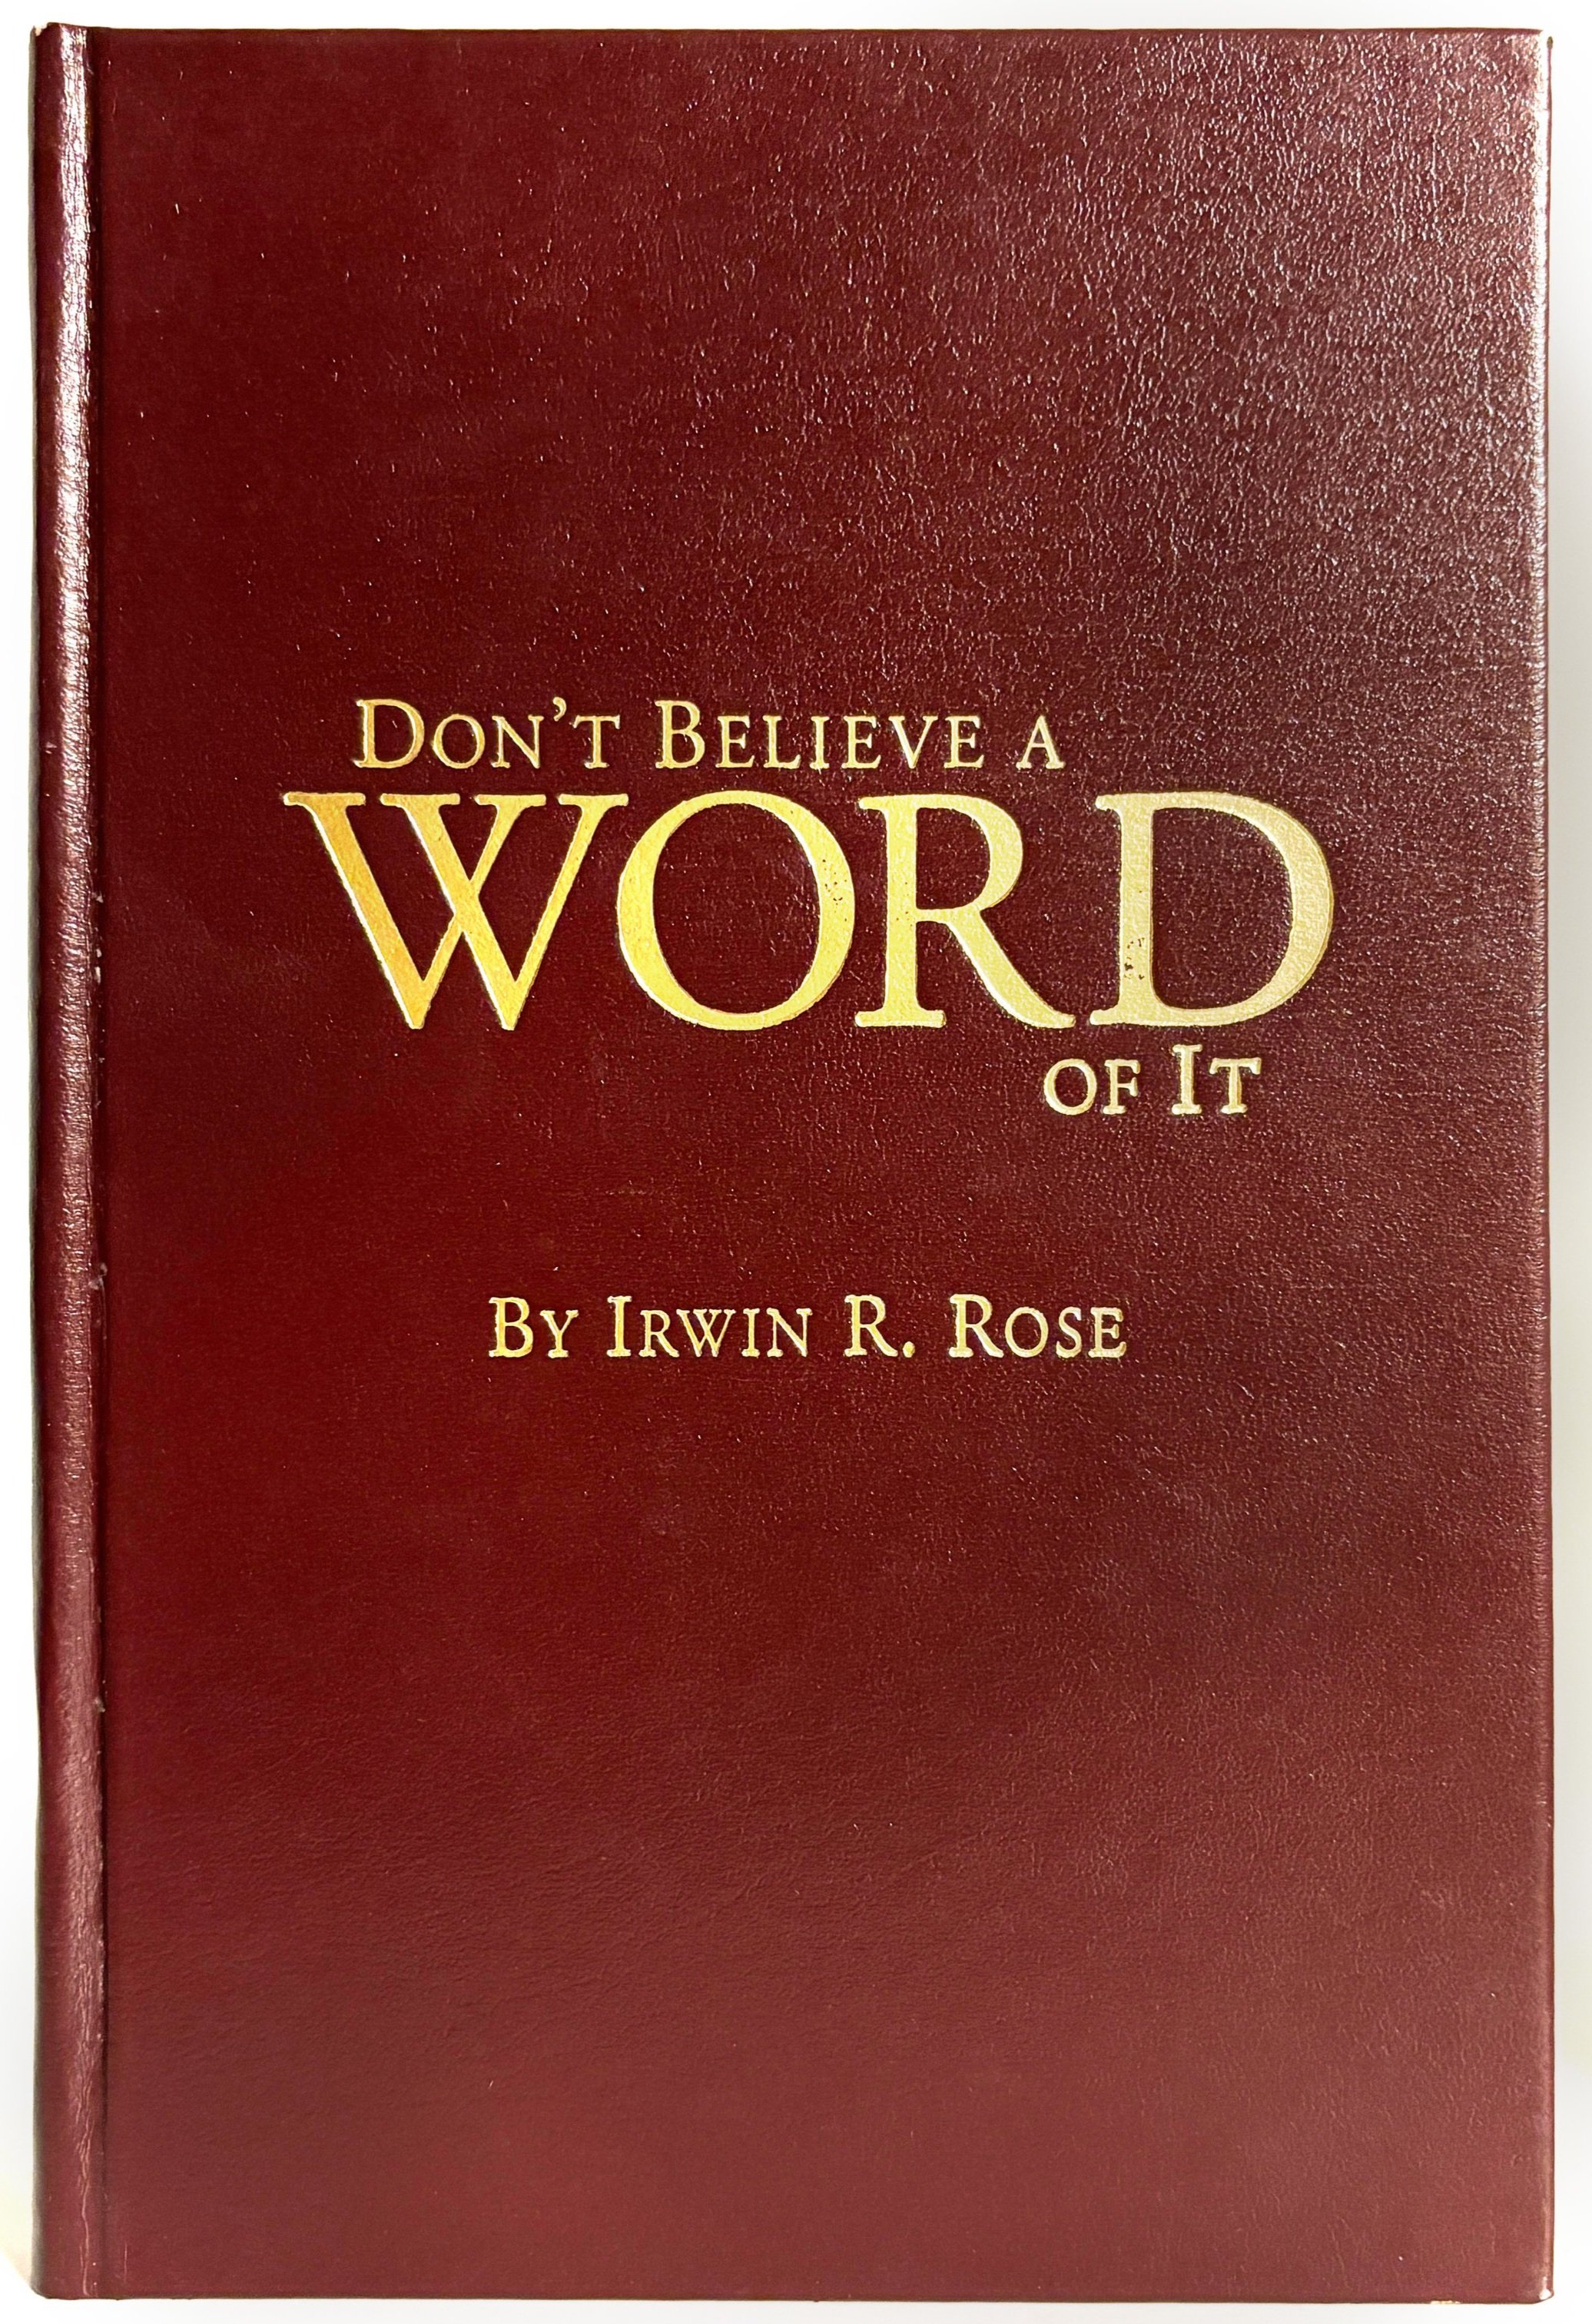 Don't Believe a Word of It (2001)